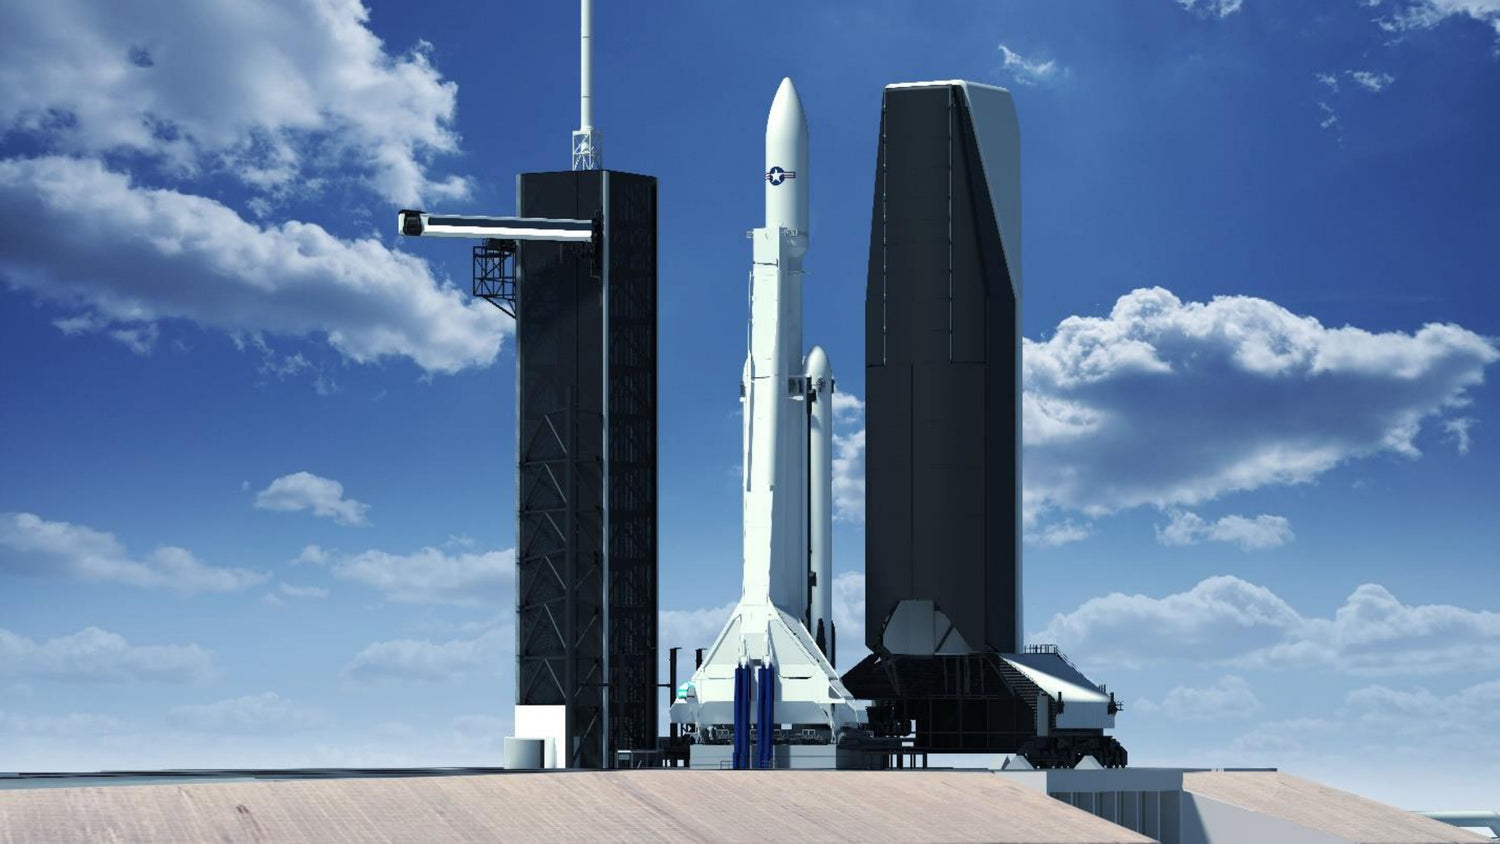 SpaceX will build an enclosed Rocket Mobile Service Tower for U.S. National Security Missions